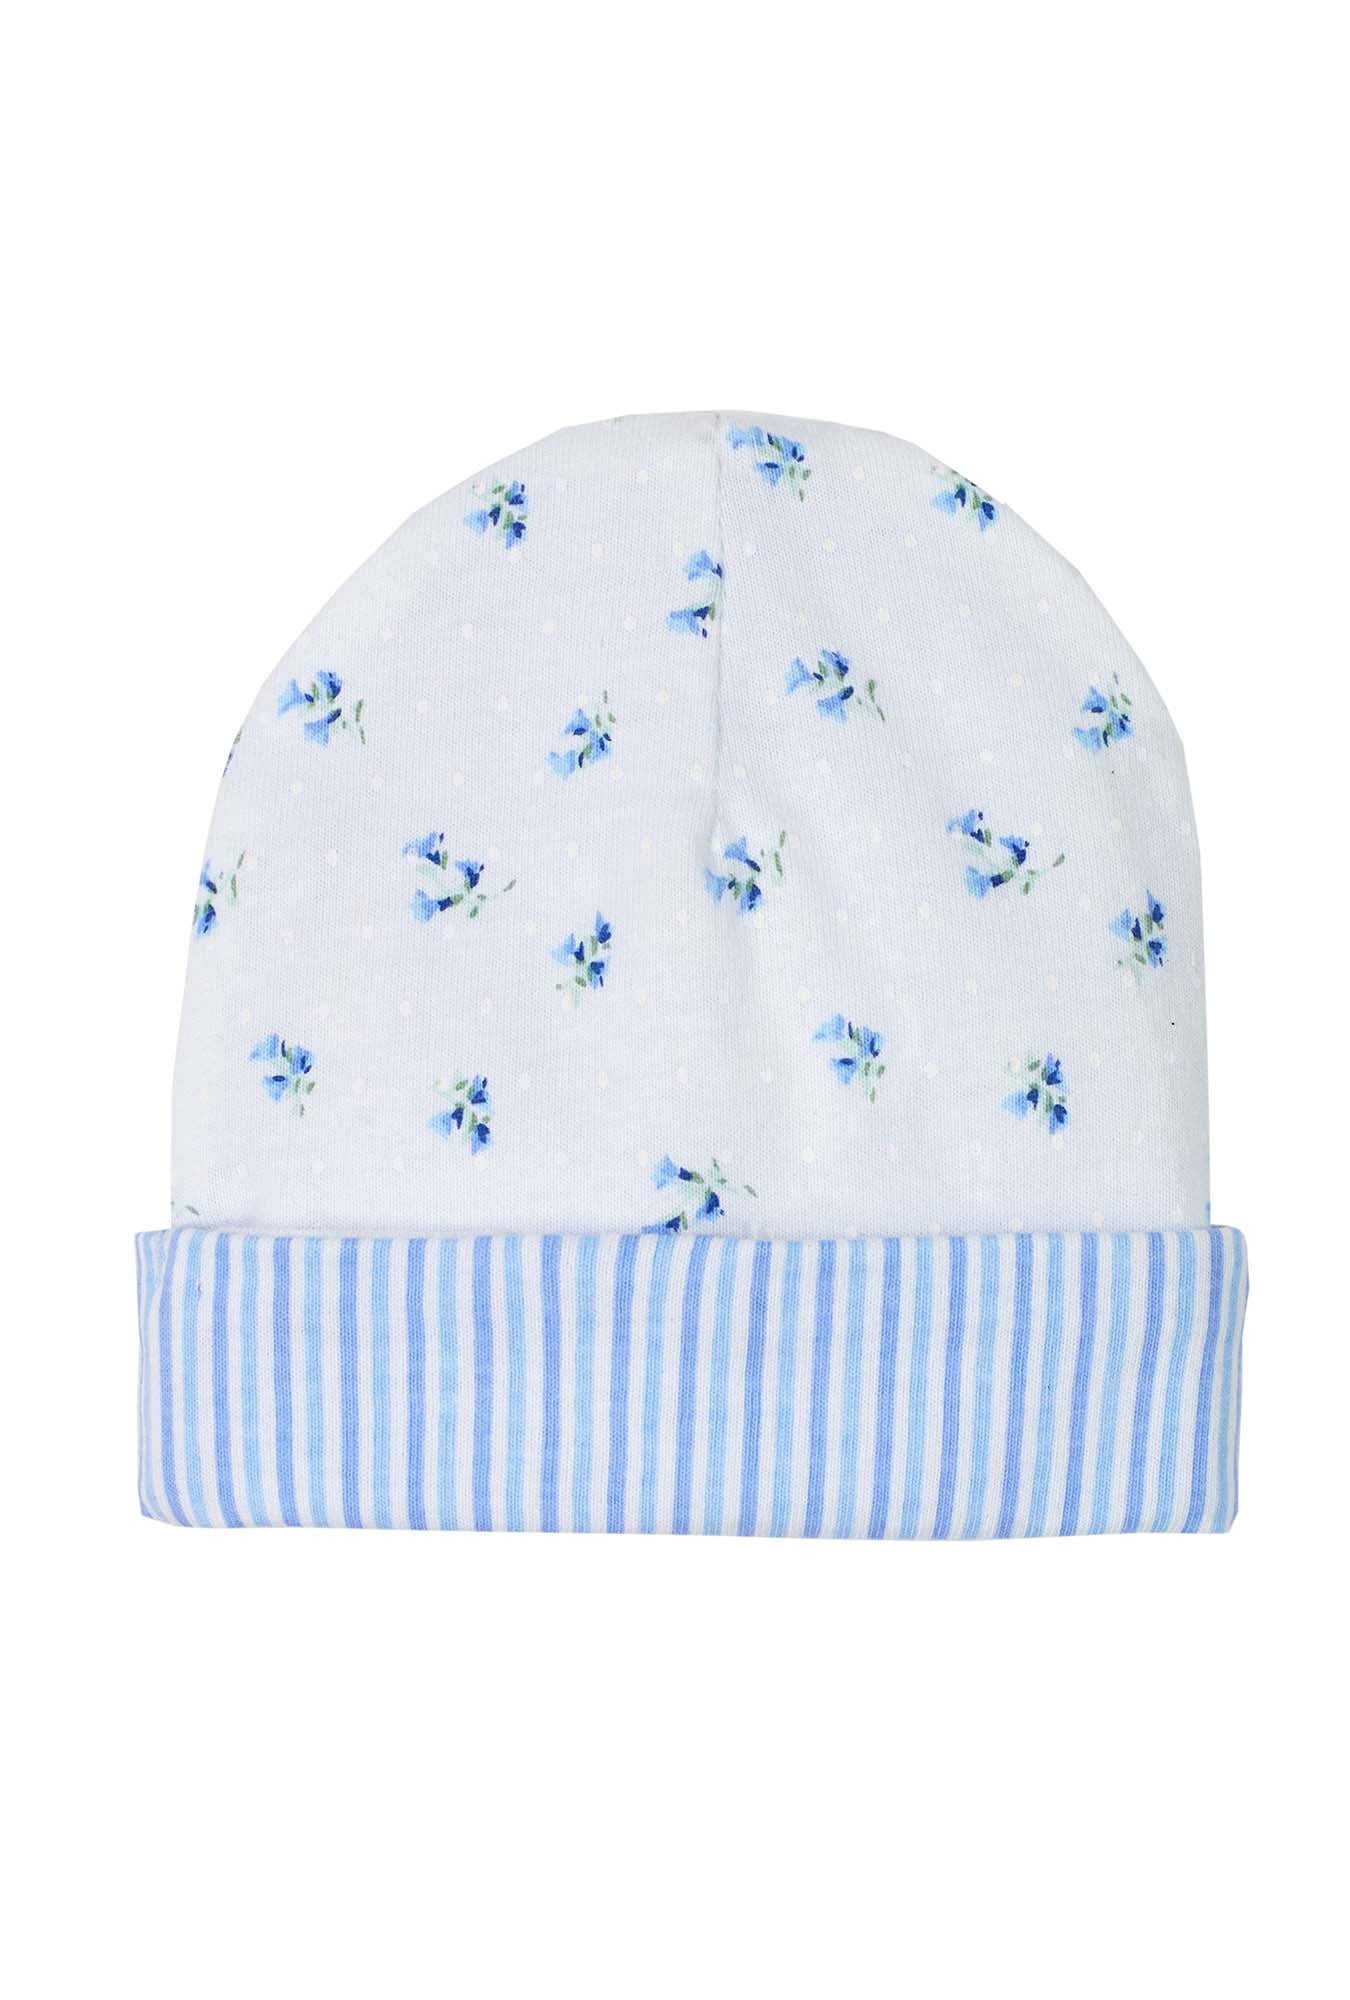 Baby Seaside Floral Cotton Hat